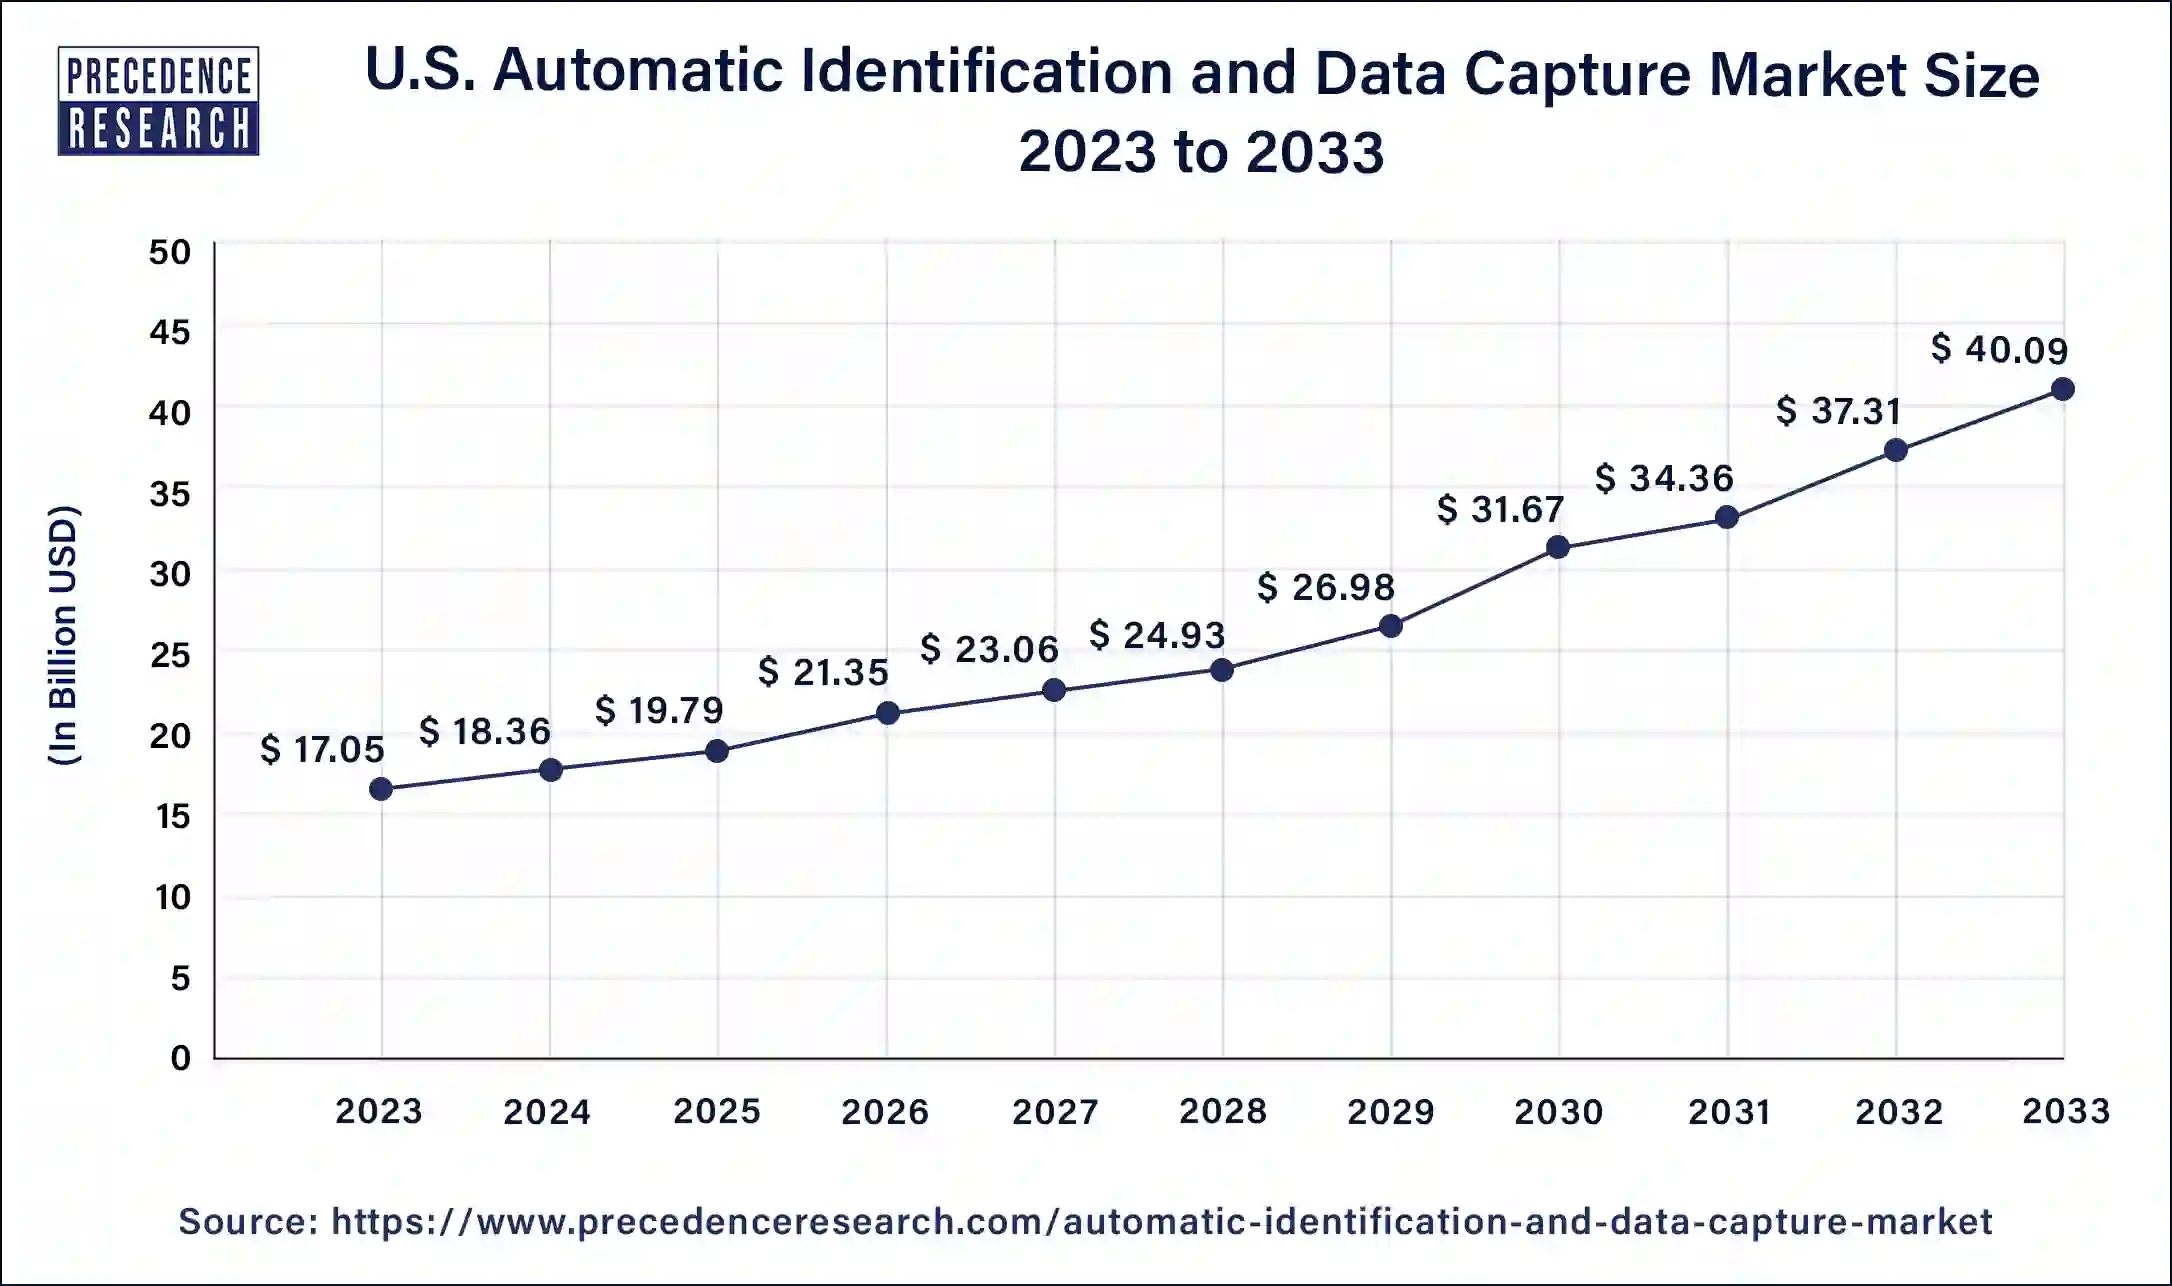 U.S. Automatic Identification and Data Capture Market Size 2024 to 2033